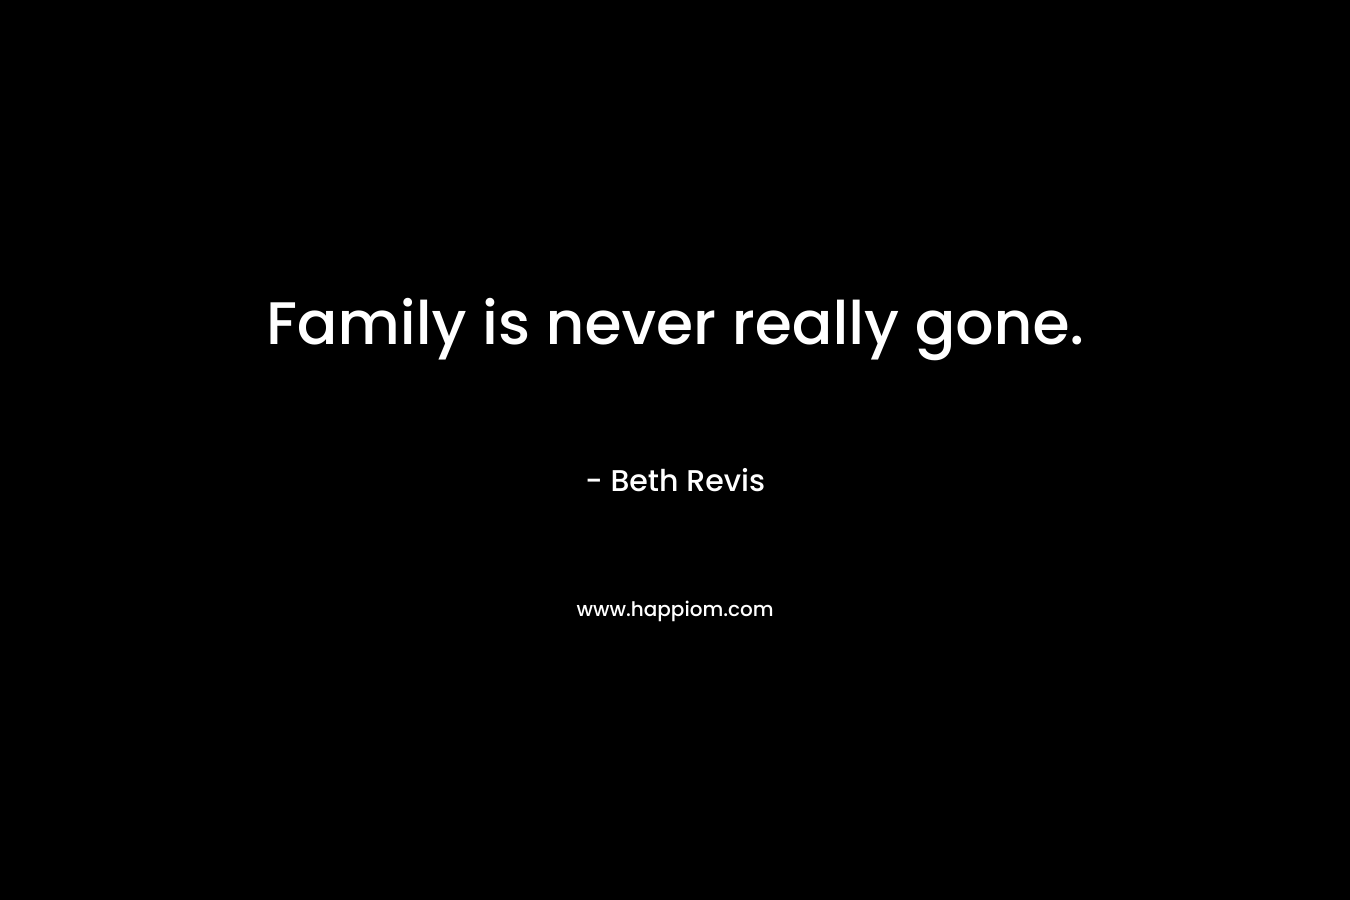 Family is never really gone.